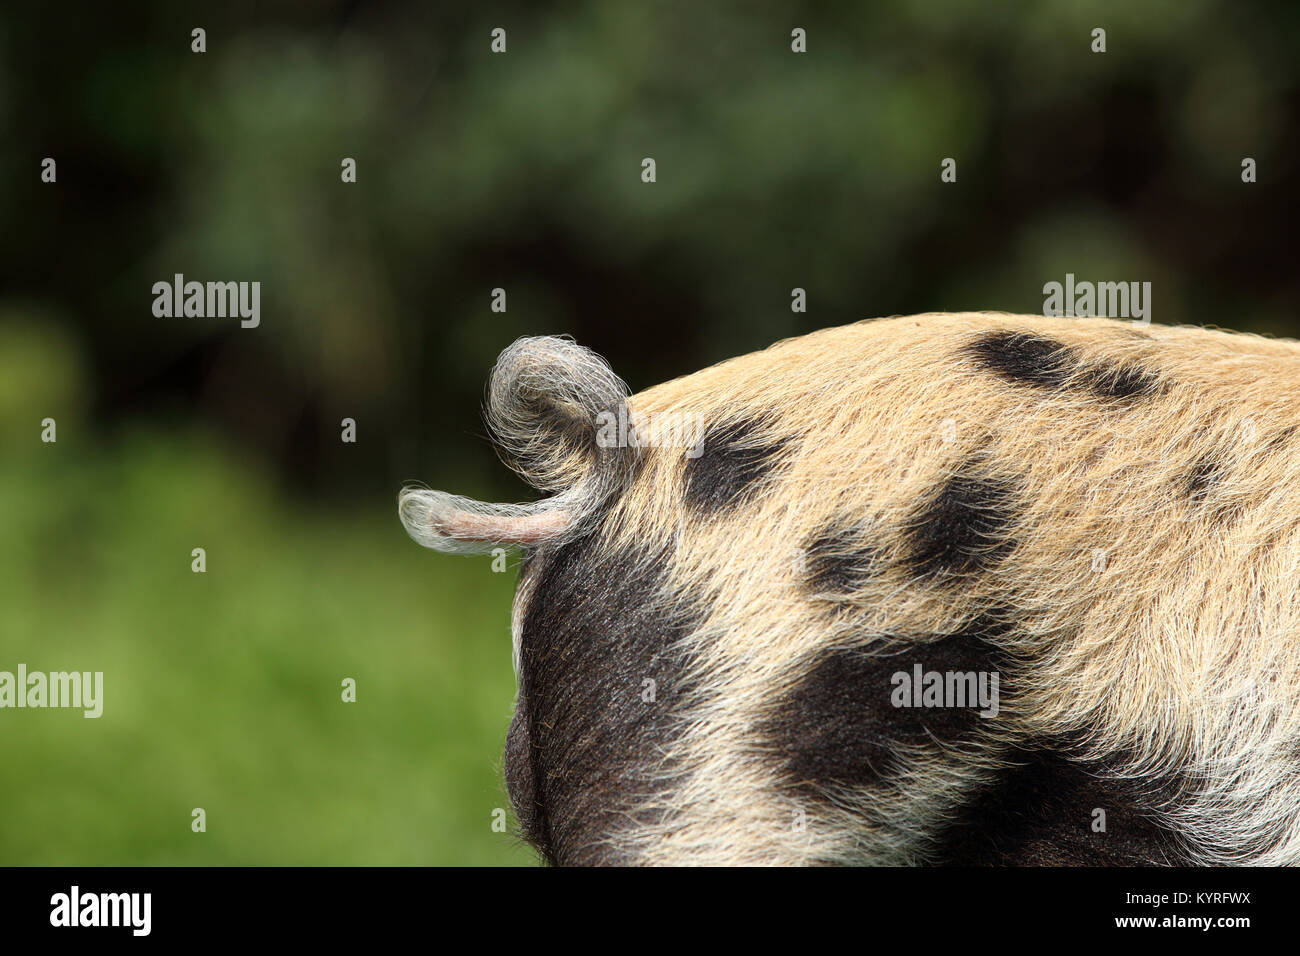 Domestic Pig, Turopolje x ?. Close-up of tail of a piglet (3 weeks old). Germany Stock Photo